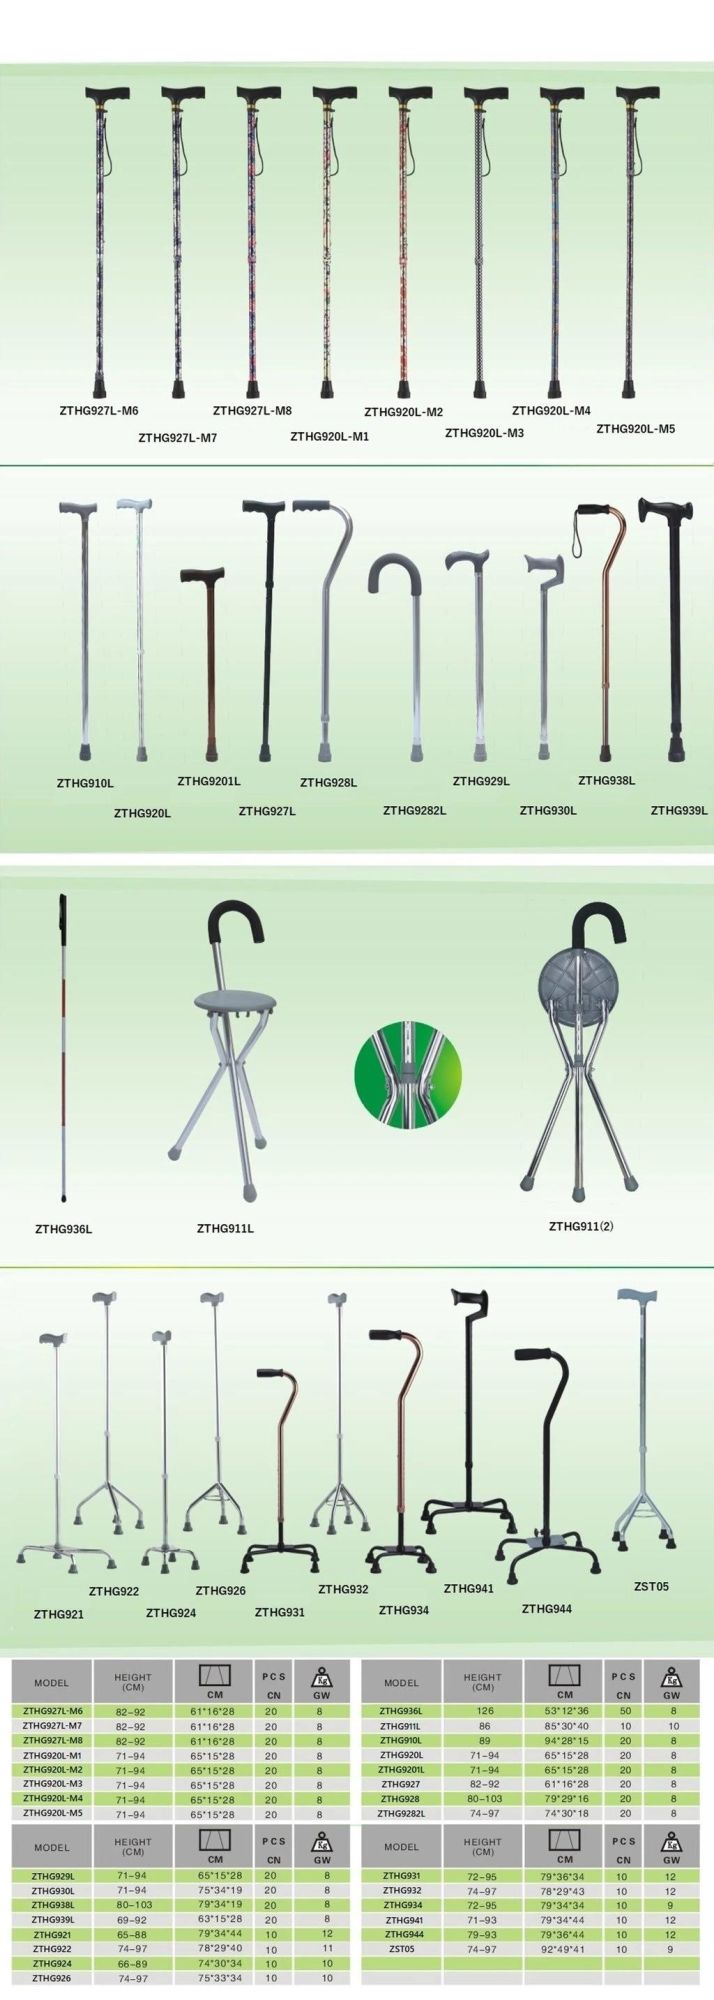 Foldable Scalable Folding Walking Stick Straight Single Antiskid Portable Disabled/Elderly People Safety Outdoor Lightweight Aluminum Easy Carry Crutch